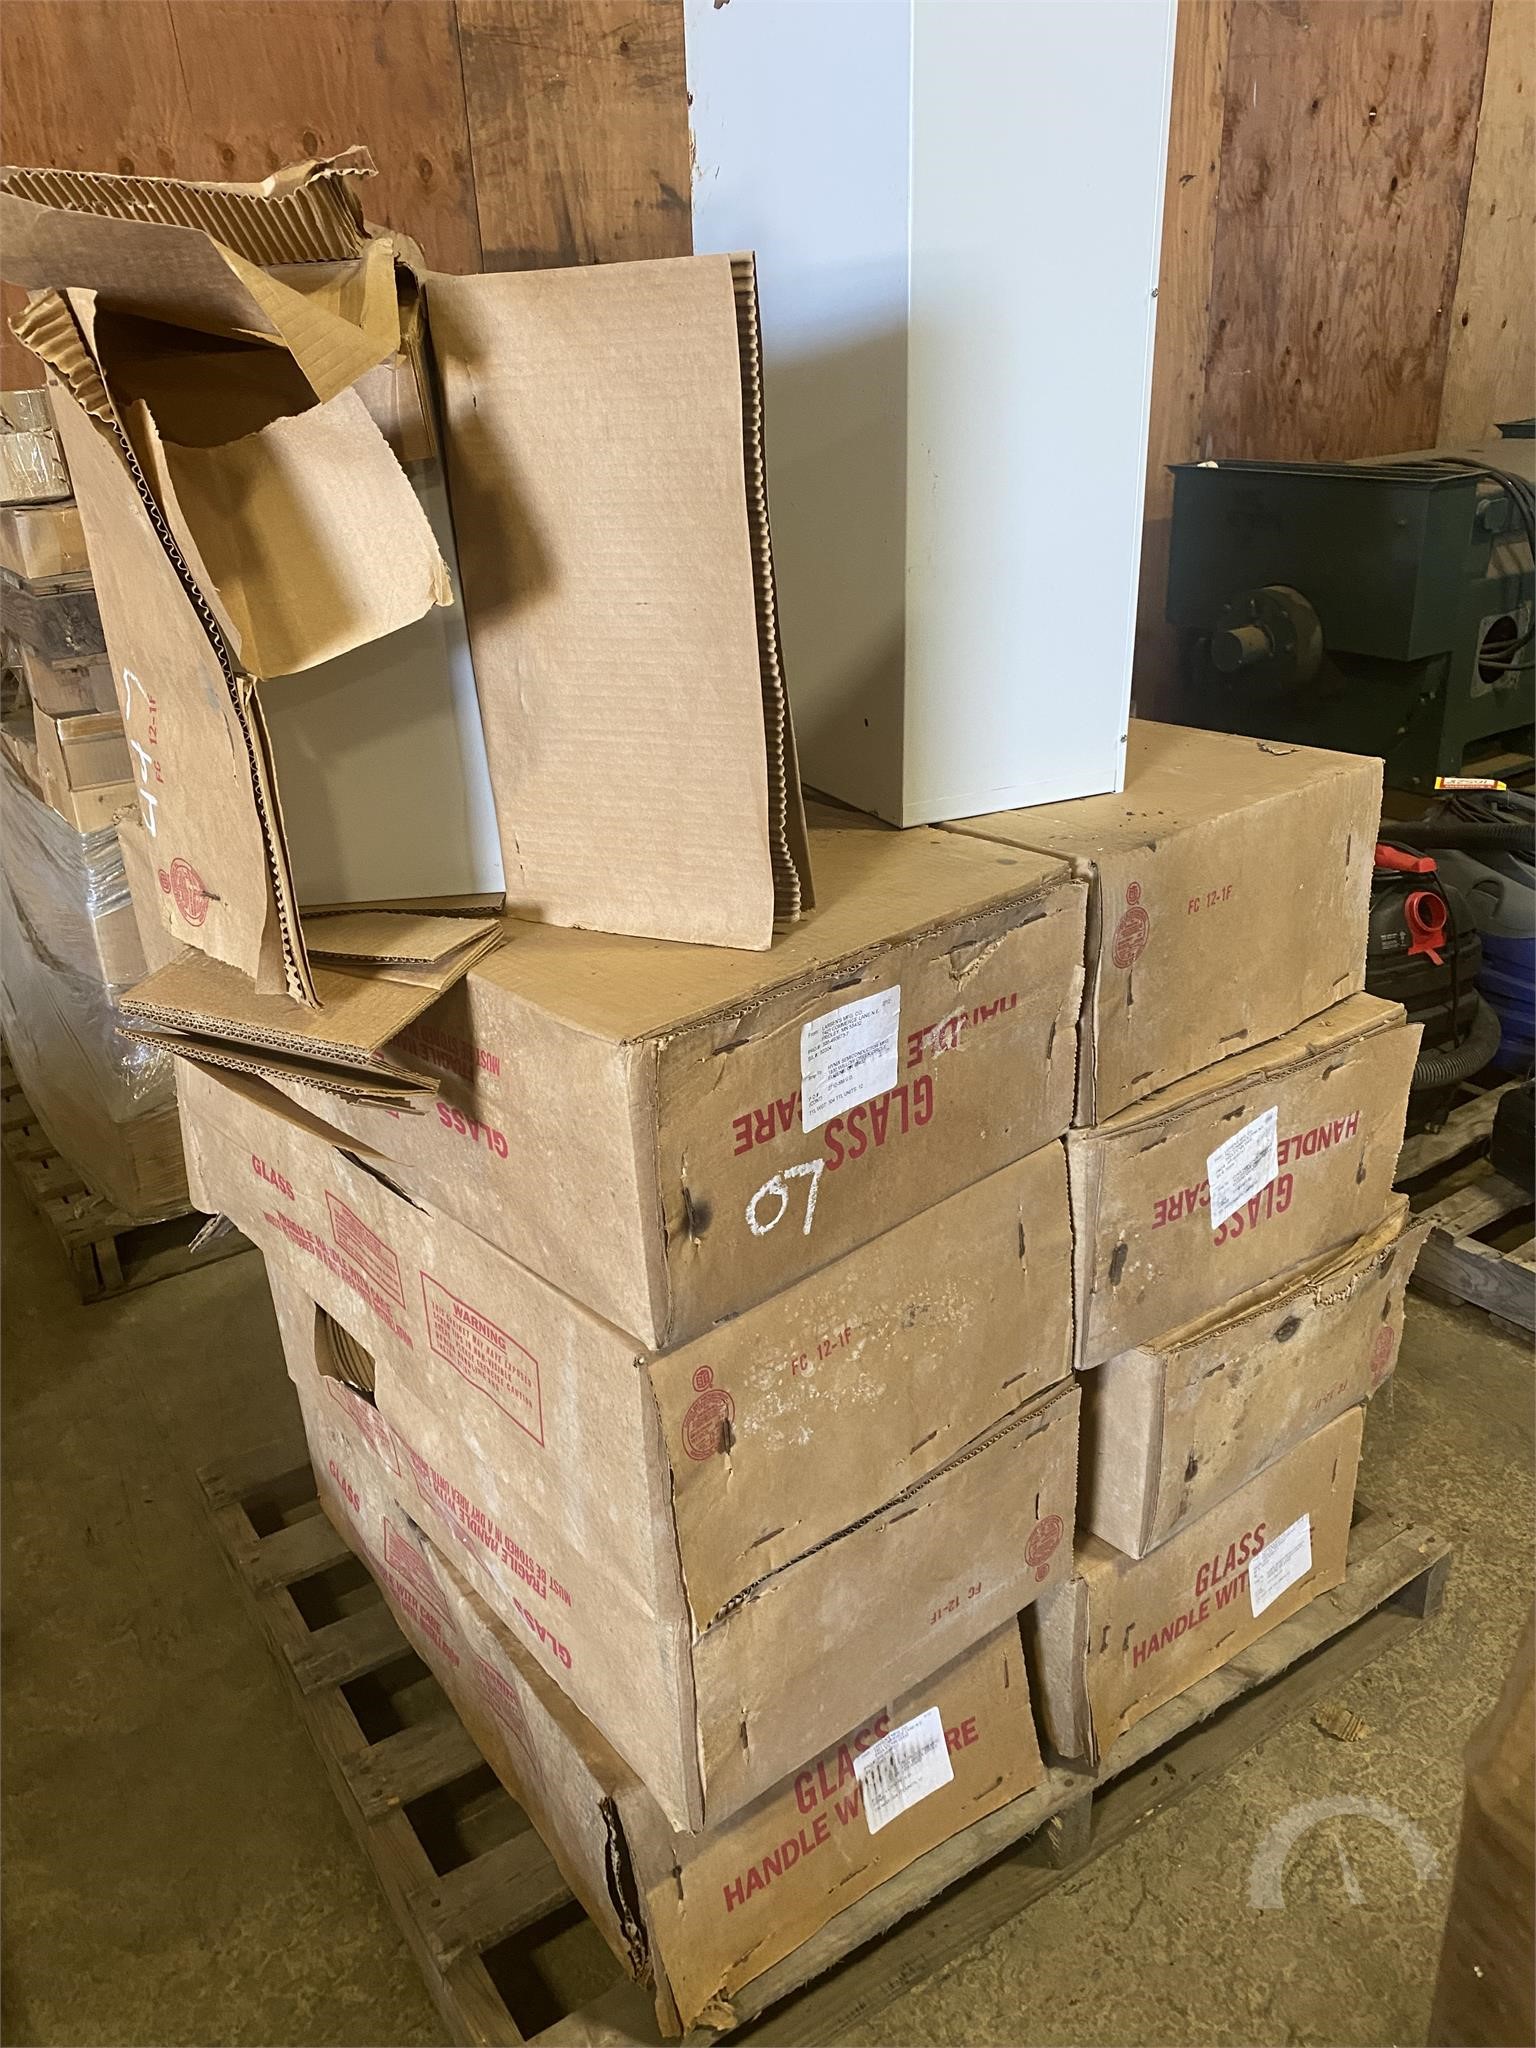 DASH GRIDDLE & 2PC BASKET SET IN BOXES - Earl's Auction Company